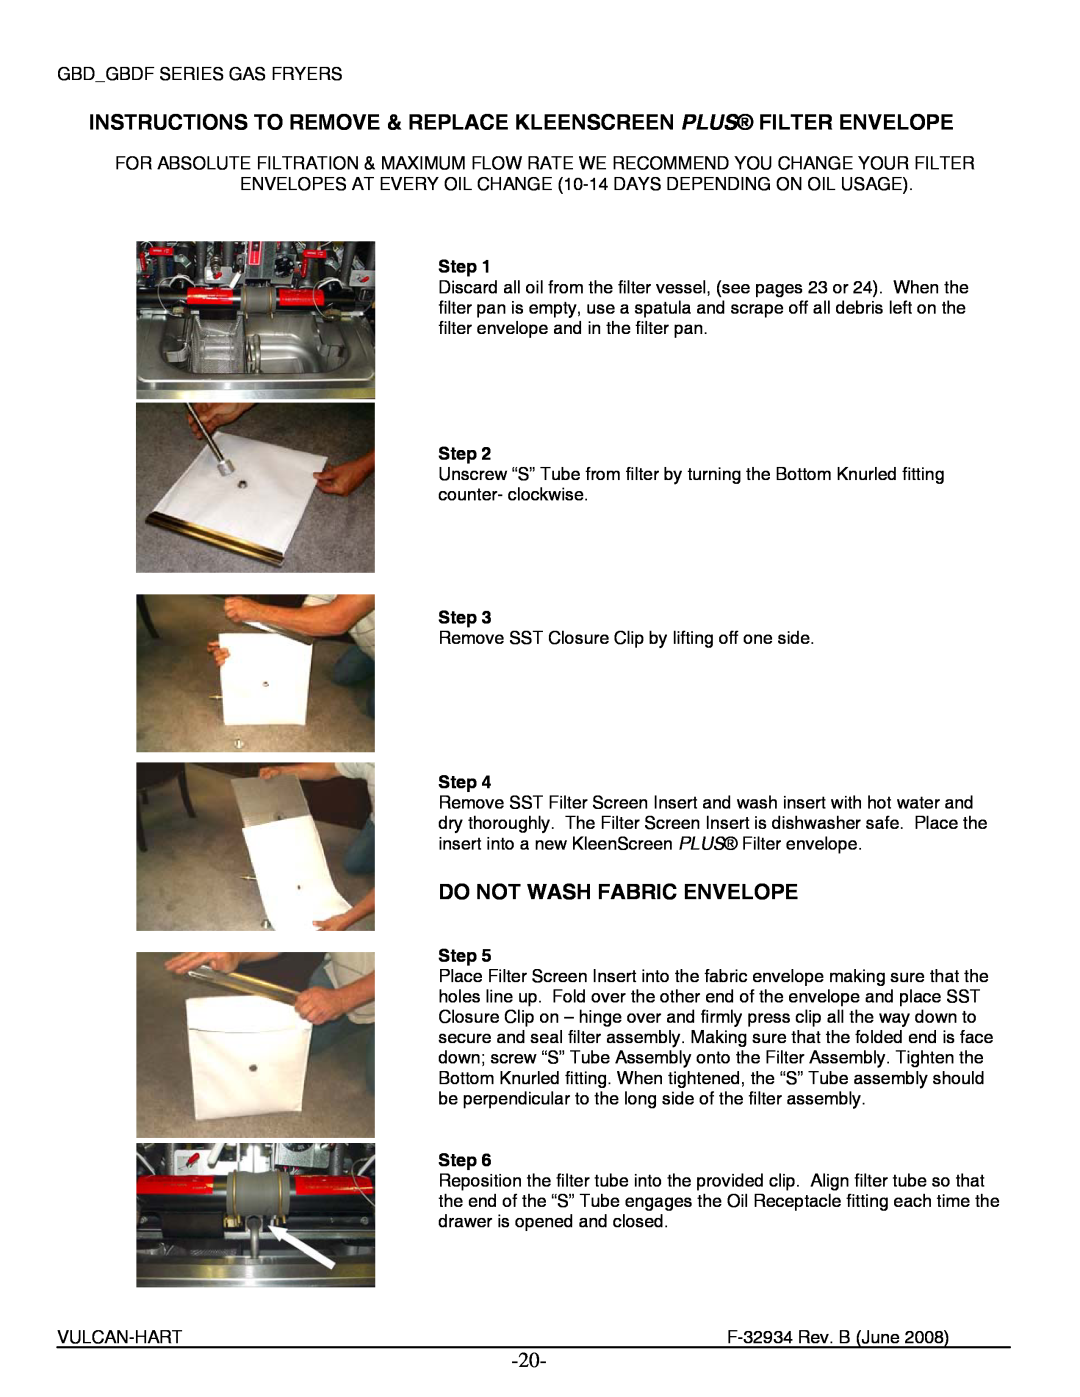 Vulcan-Hart 2XG4BDF Instructions To Remove & Replace Kleenscreen Plus Filter Envelope, Do Not Wash Fabric Envelope, Step 